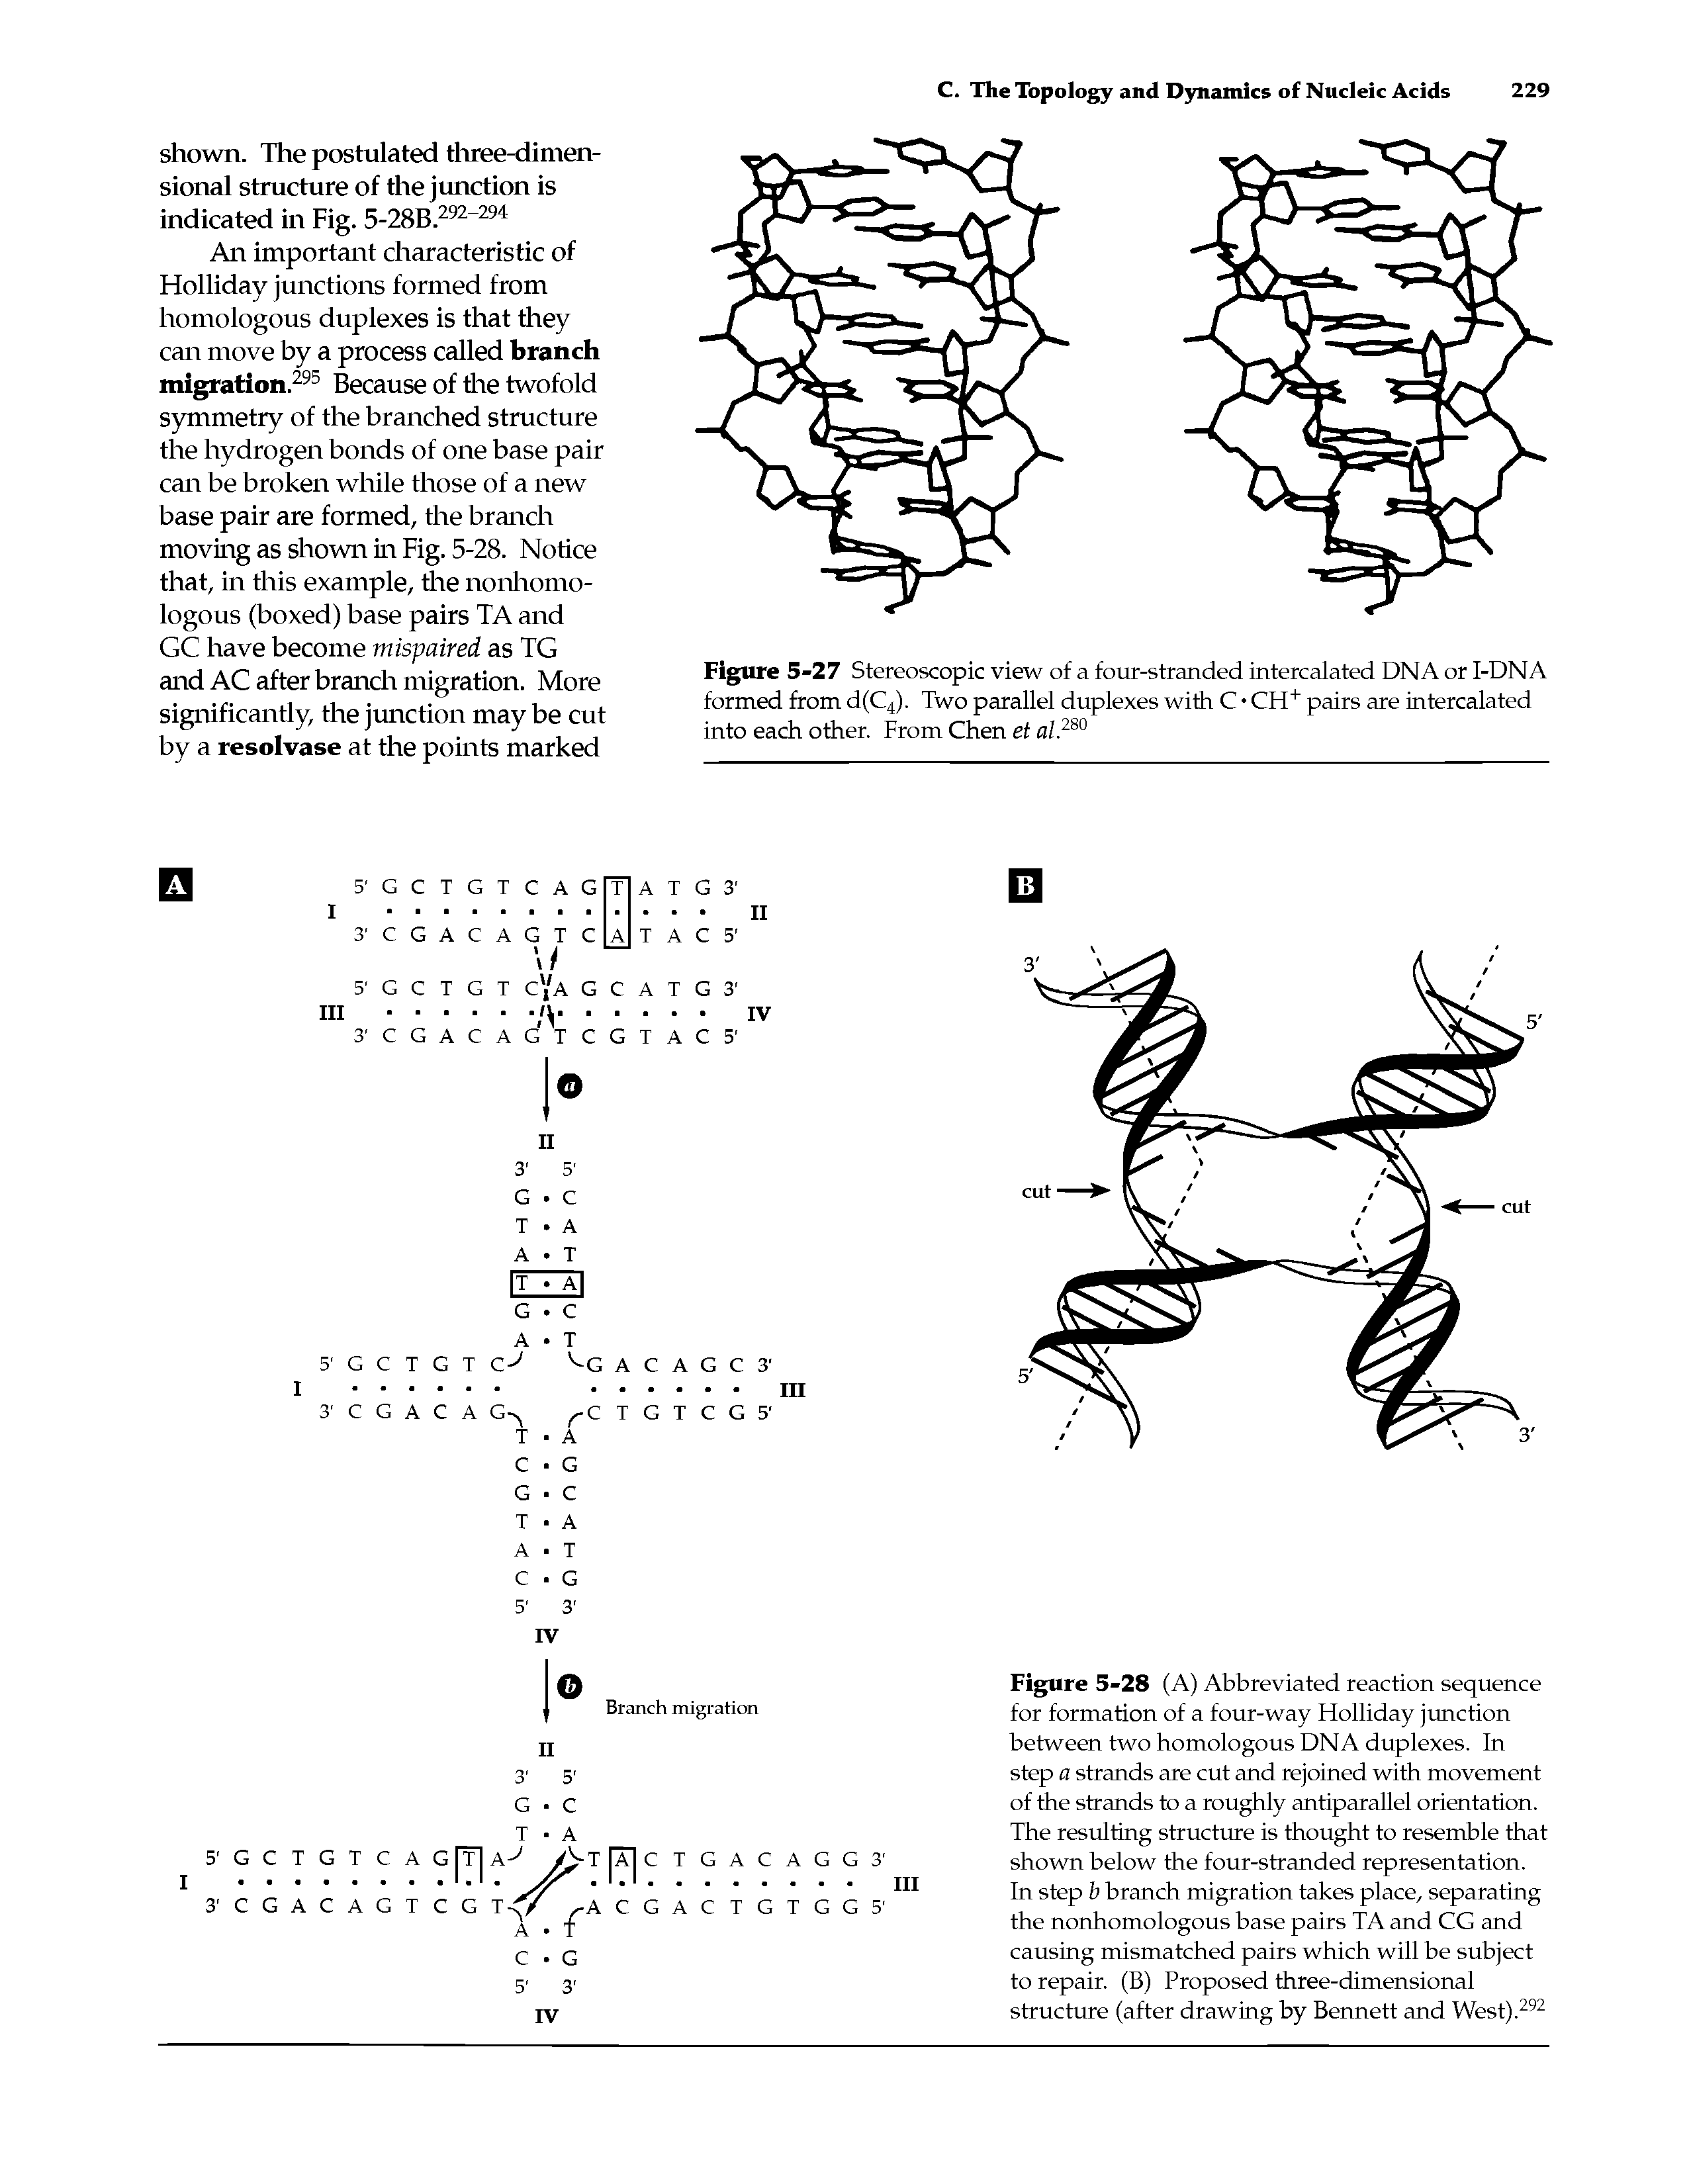 Figure 5-27 Stereoscopic view of a four-stranded intercalated DNA or I-DNA formed from d(C4). Two parallel duplexes with C CH+ pairs are intercalated into each other. From Chen et al.280...